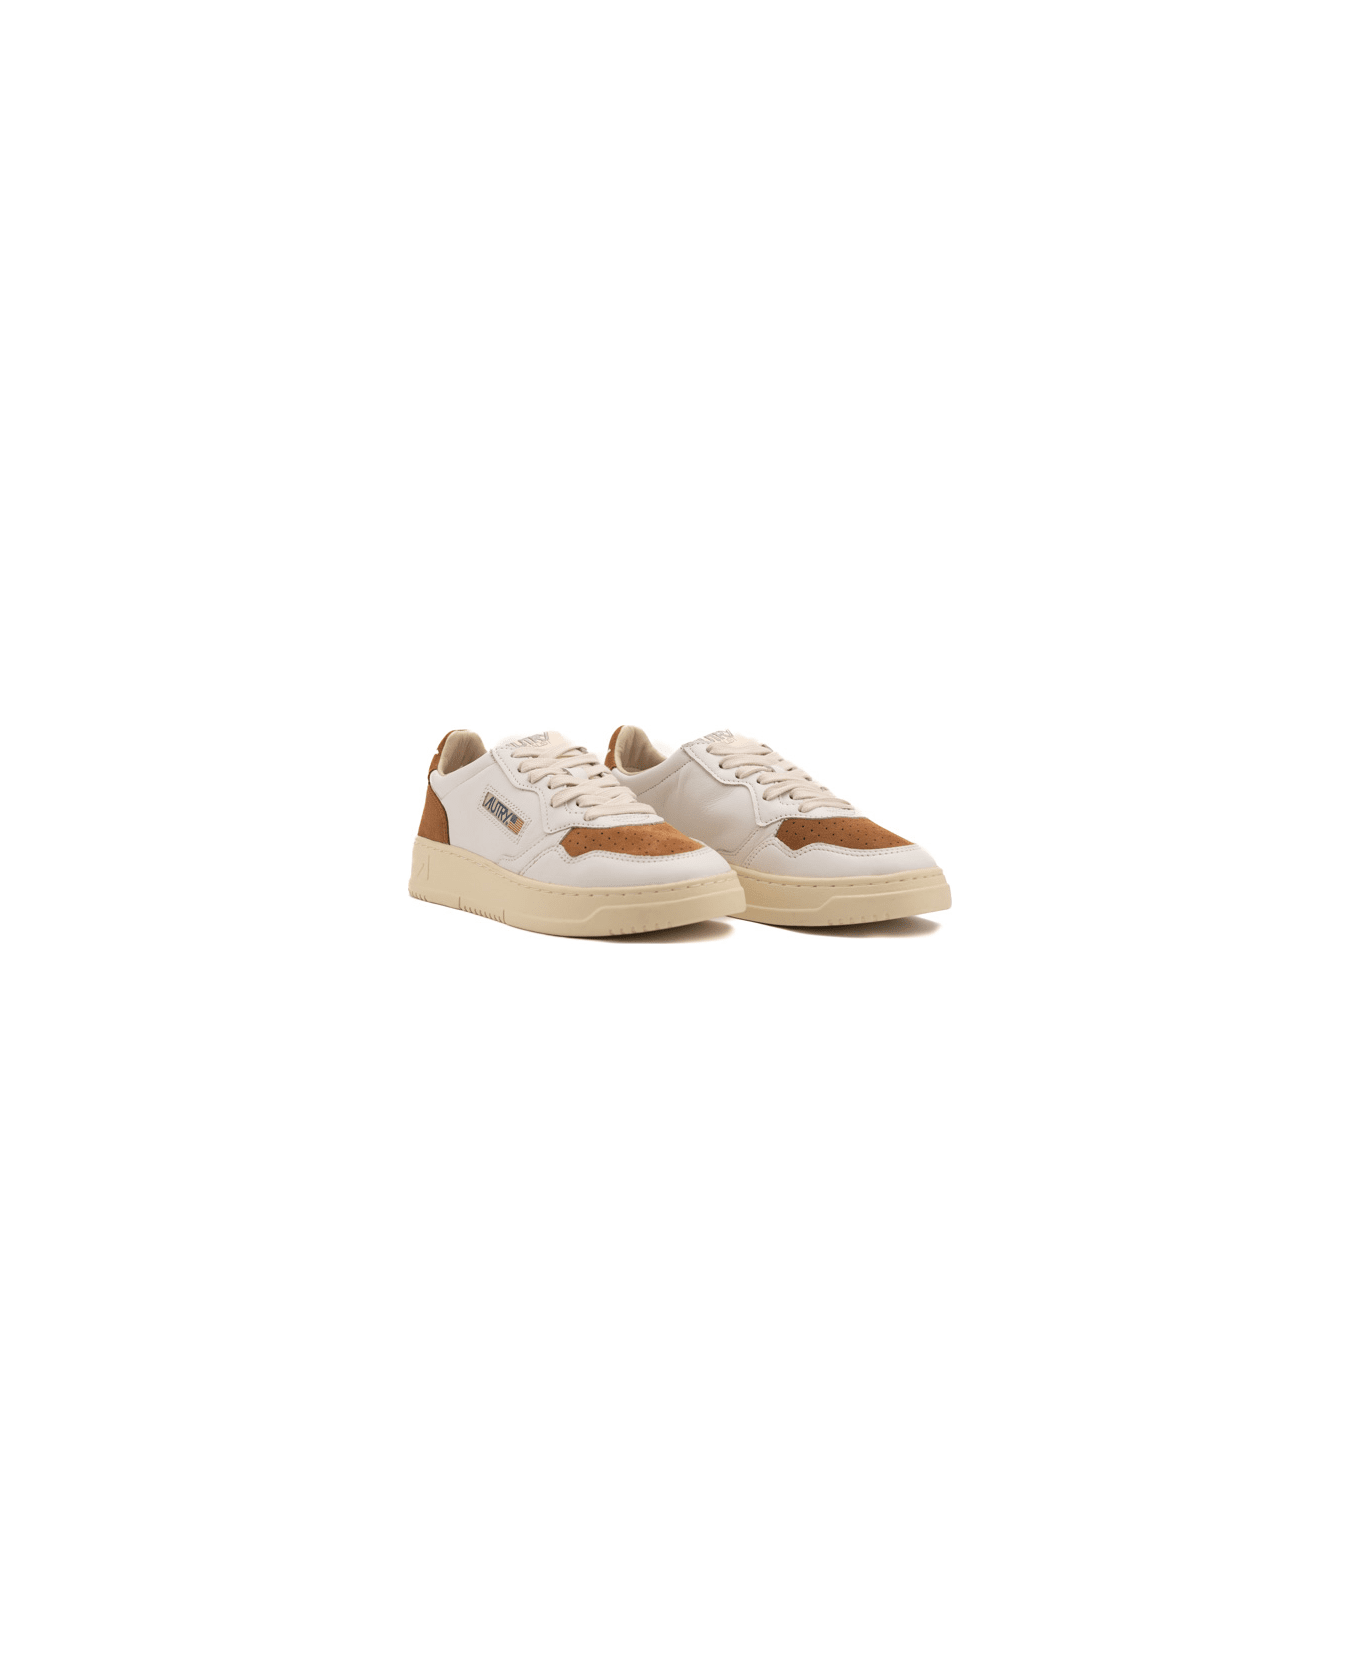 Autry Medalist Low Sneakers - Wht/crml スニーカー